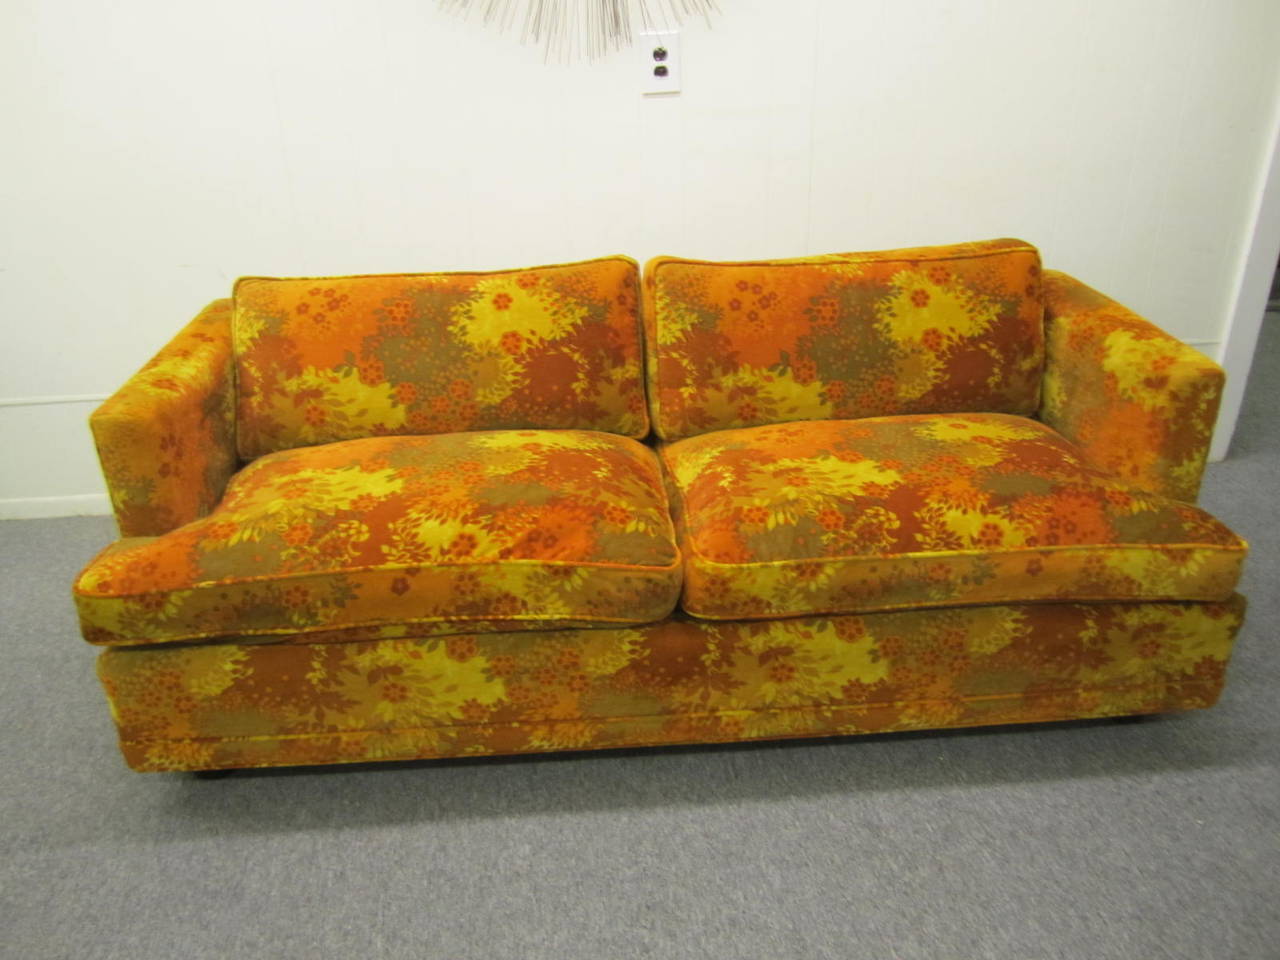 Excellent pair of Edward Wormley designed for Dunbar love seat sofas. They retain their original Jack Lenor Larsen velvet fabric in close to excellent condition. All the cushions are down filled and are ohhh so comfortable. The legs are squatty